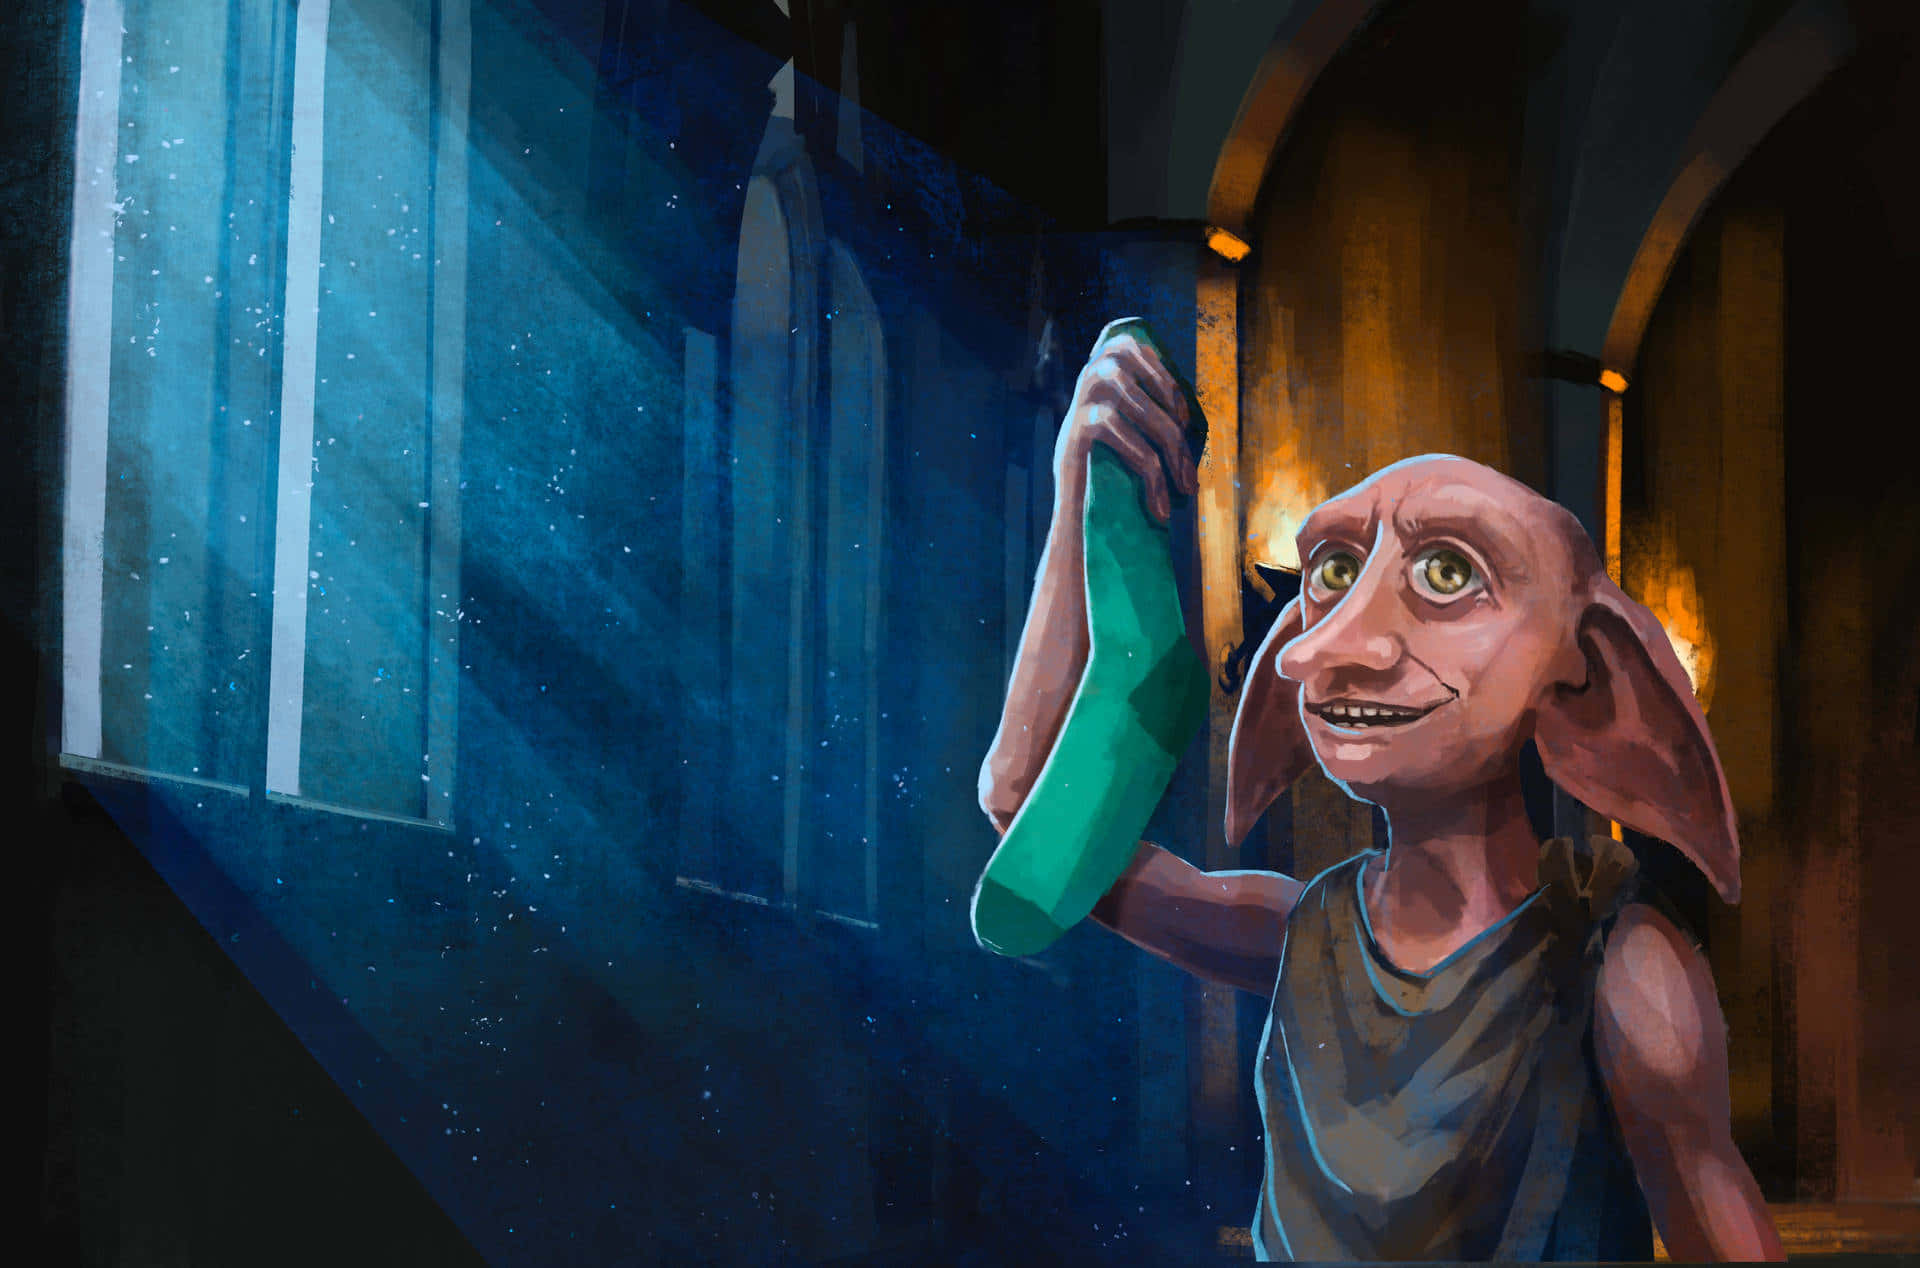 Download We are free! – Dobby, Harry Potter Wallpaper